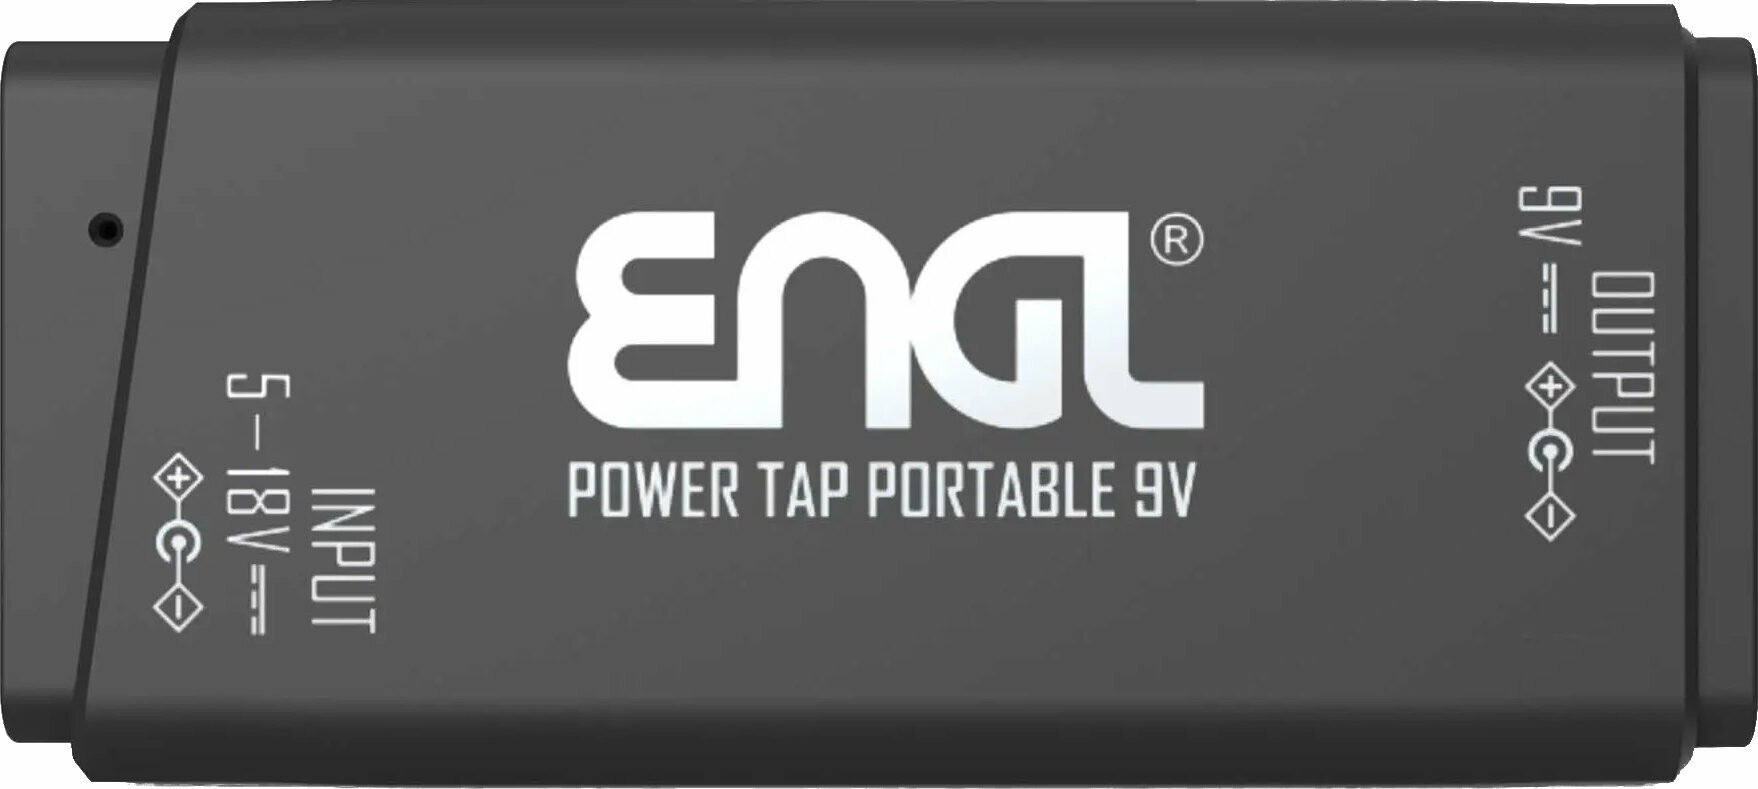 Power Supply Adapter Engl Power Tap Portable / USB to 9V